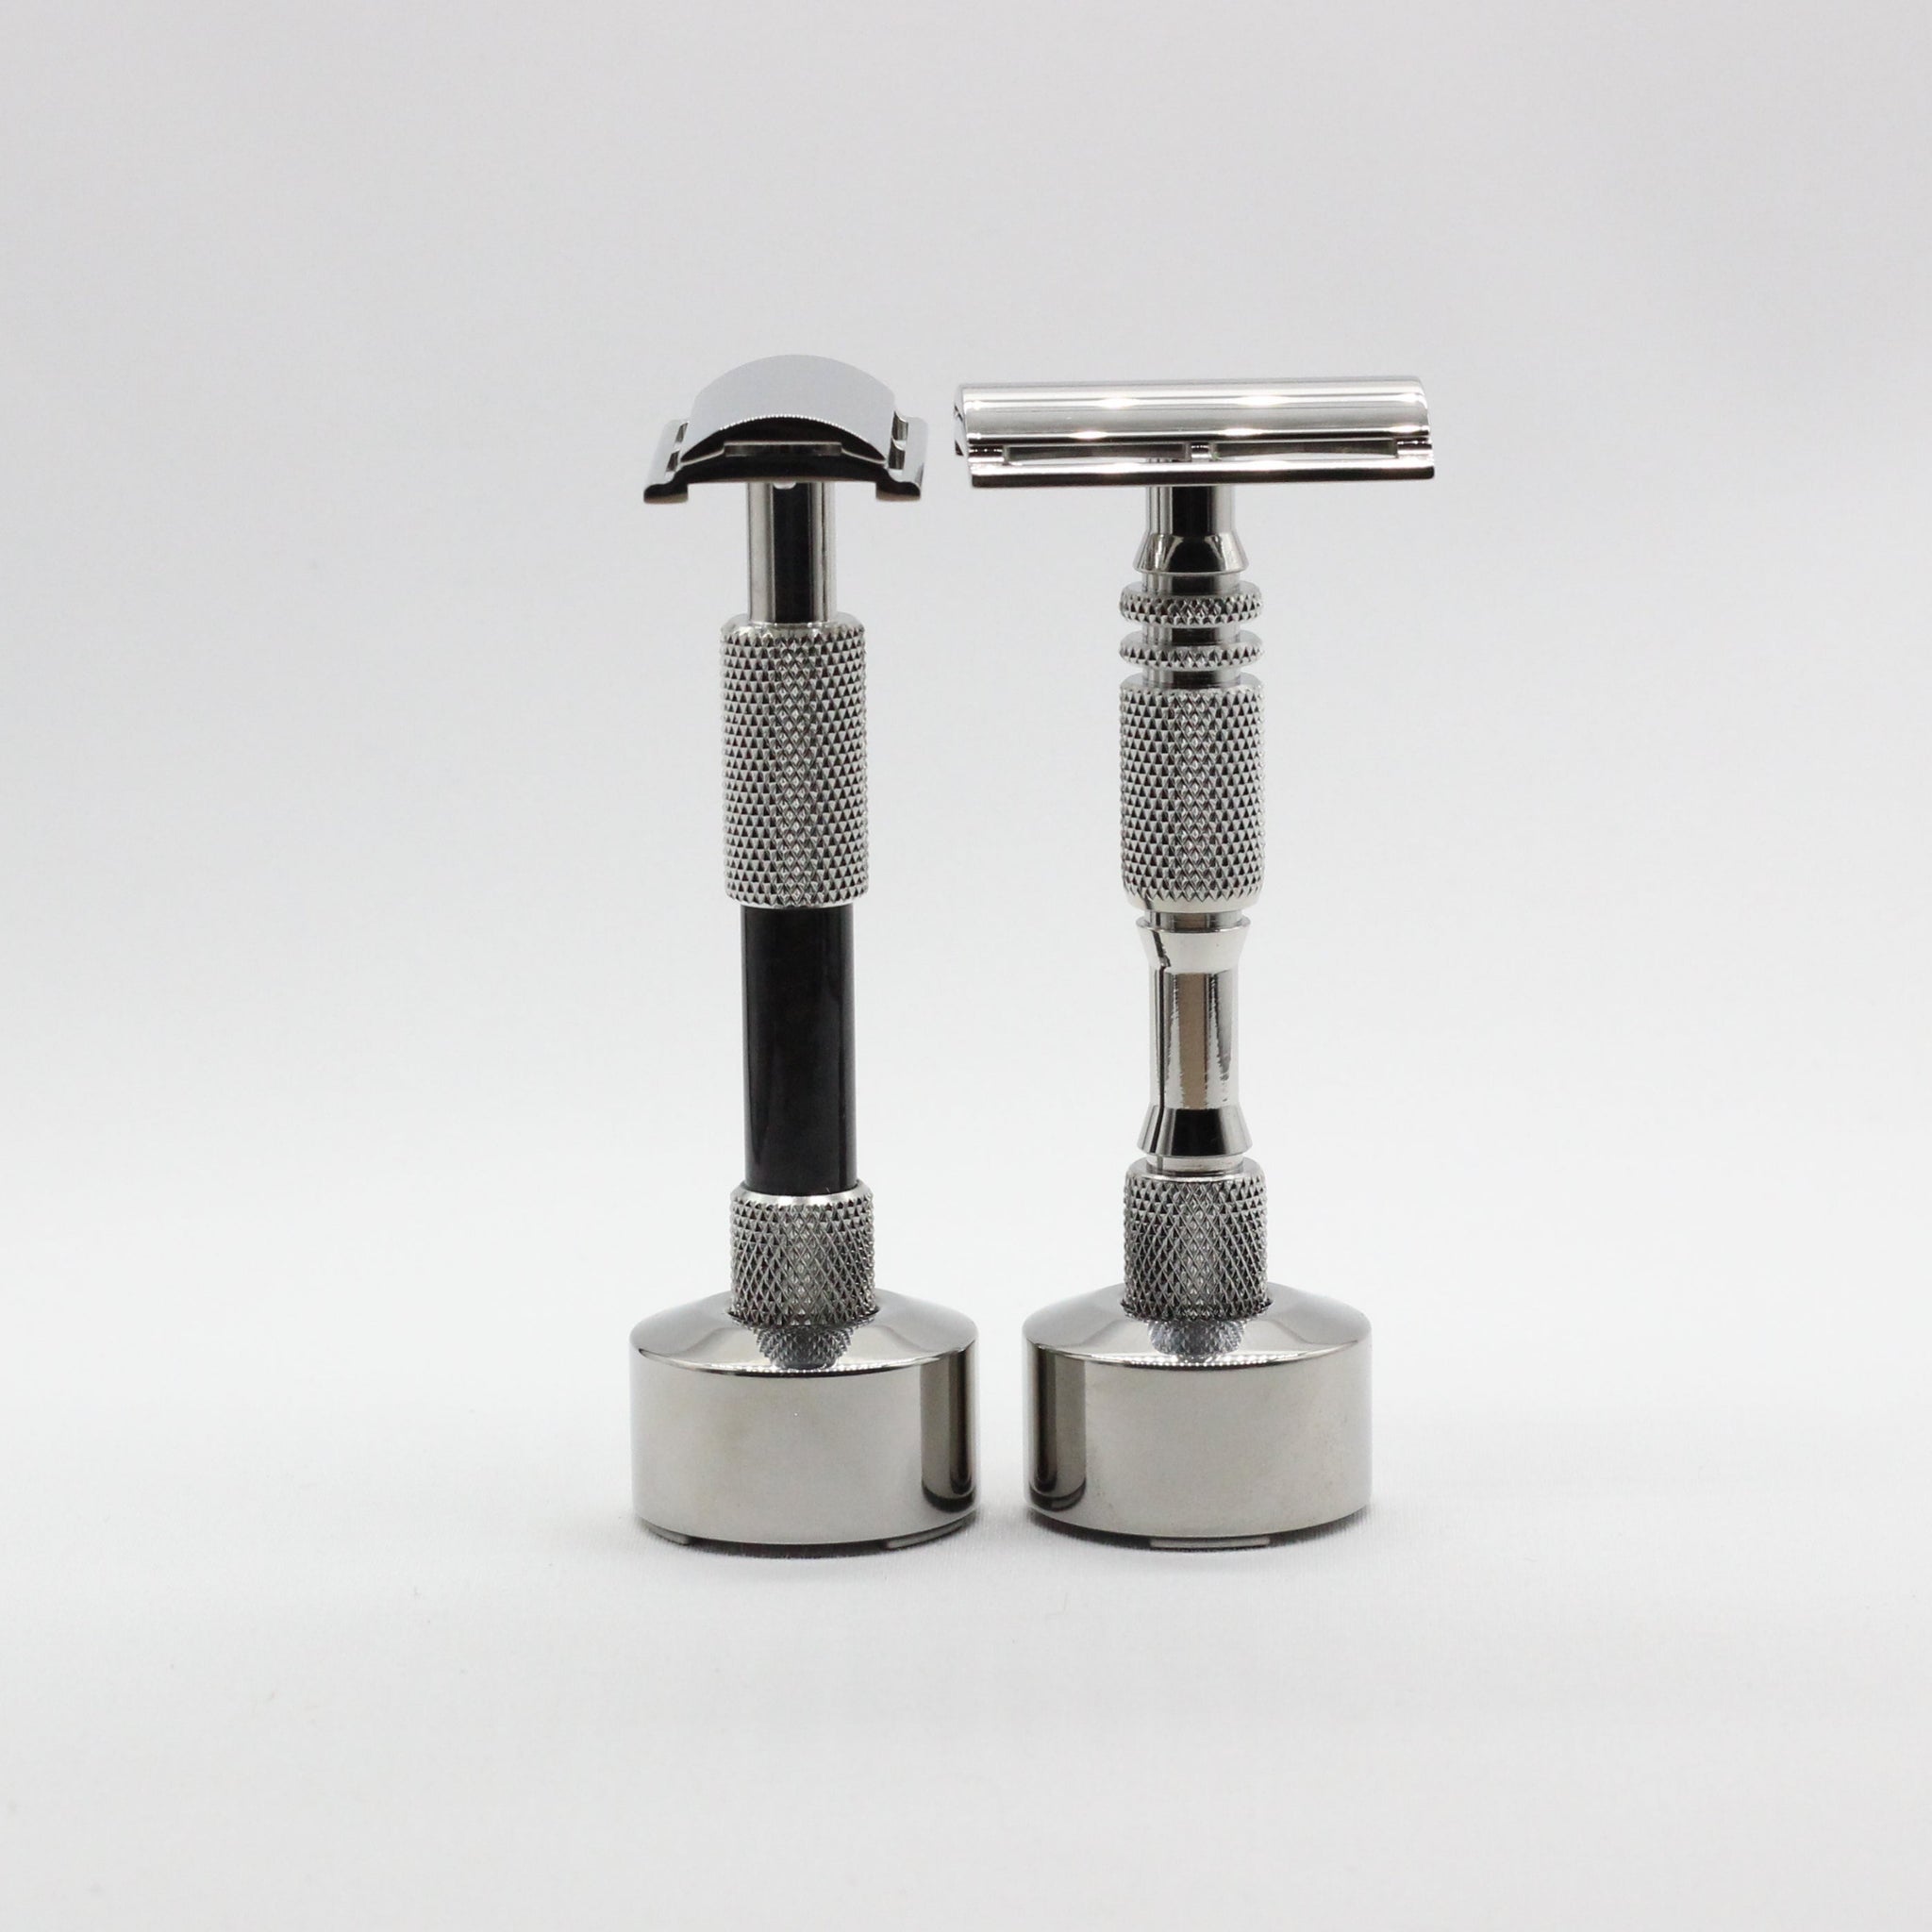 Fits all Cx safety razors - Titanium safety razor stand - Grade 5 Titanium alloy - Tripod feet to allow water and air to flow - polished finish - works with all carbon shaving co single edge safety shavers